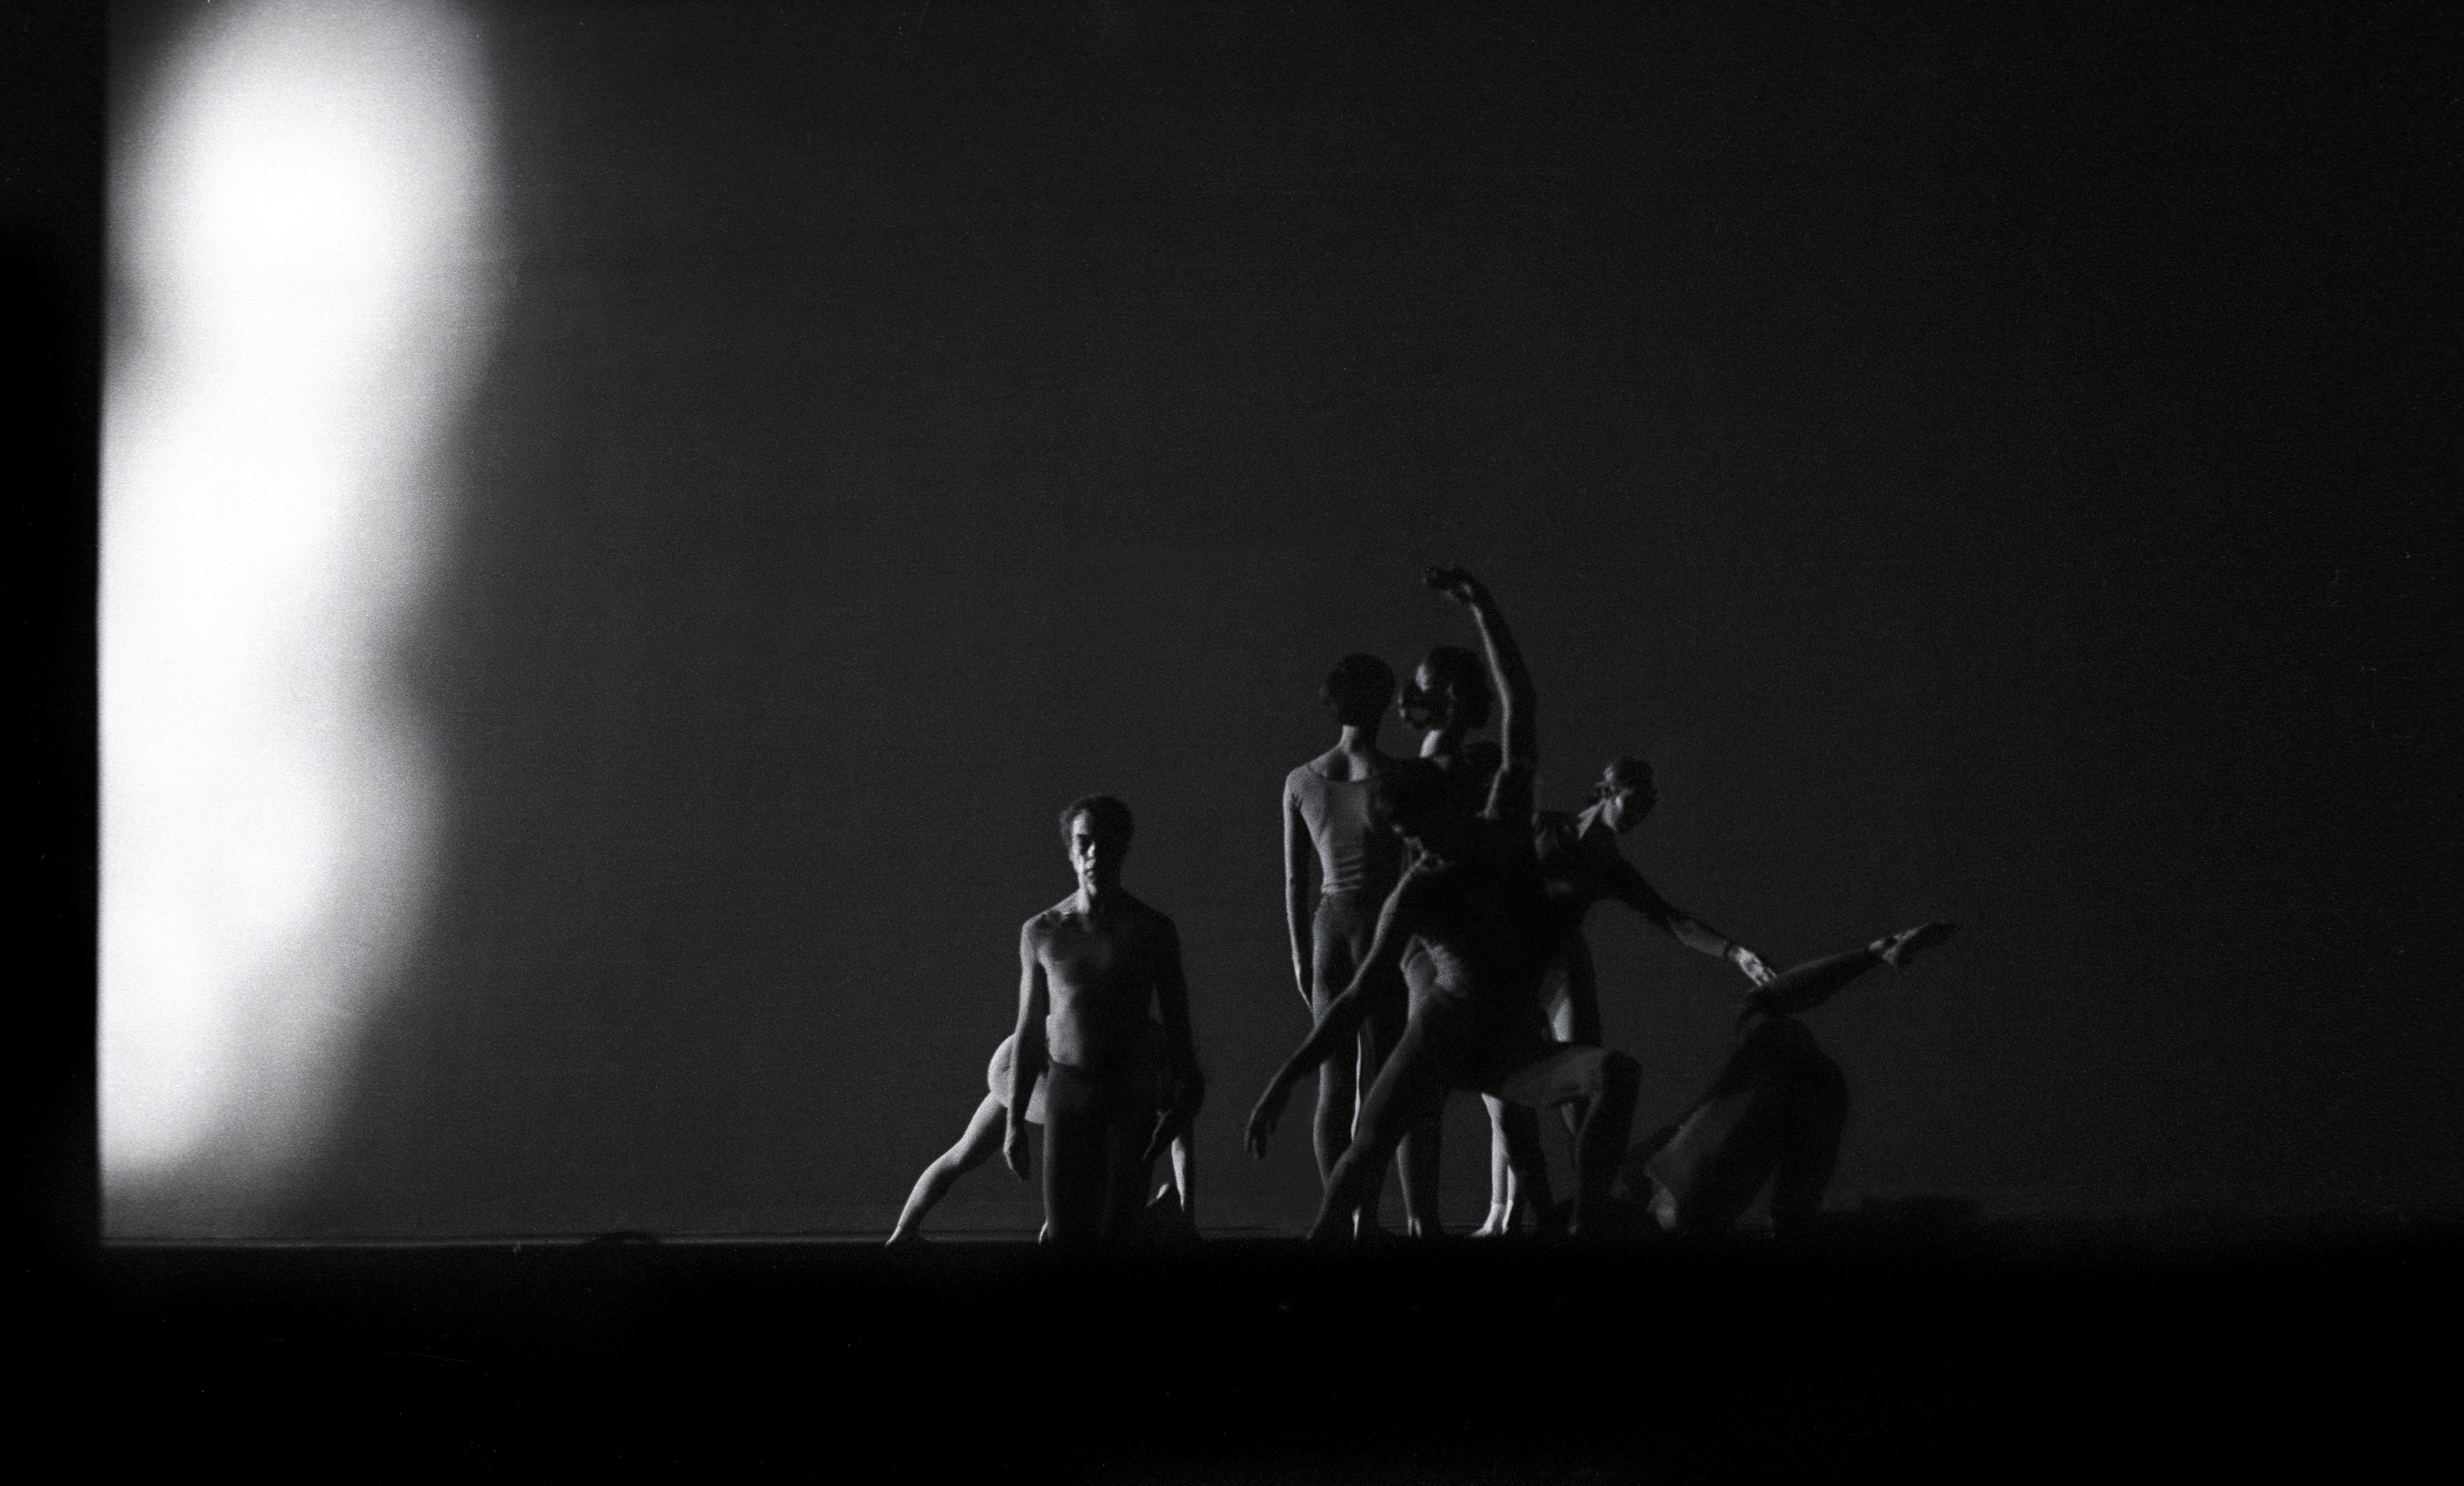 Seven dancers pose in a triangular form against an empty backdrop, illuminated by a strong bright coming from the left.